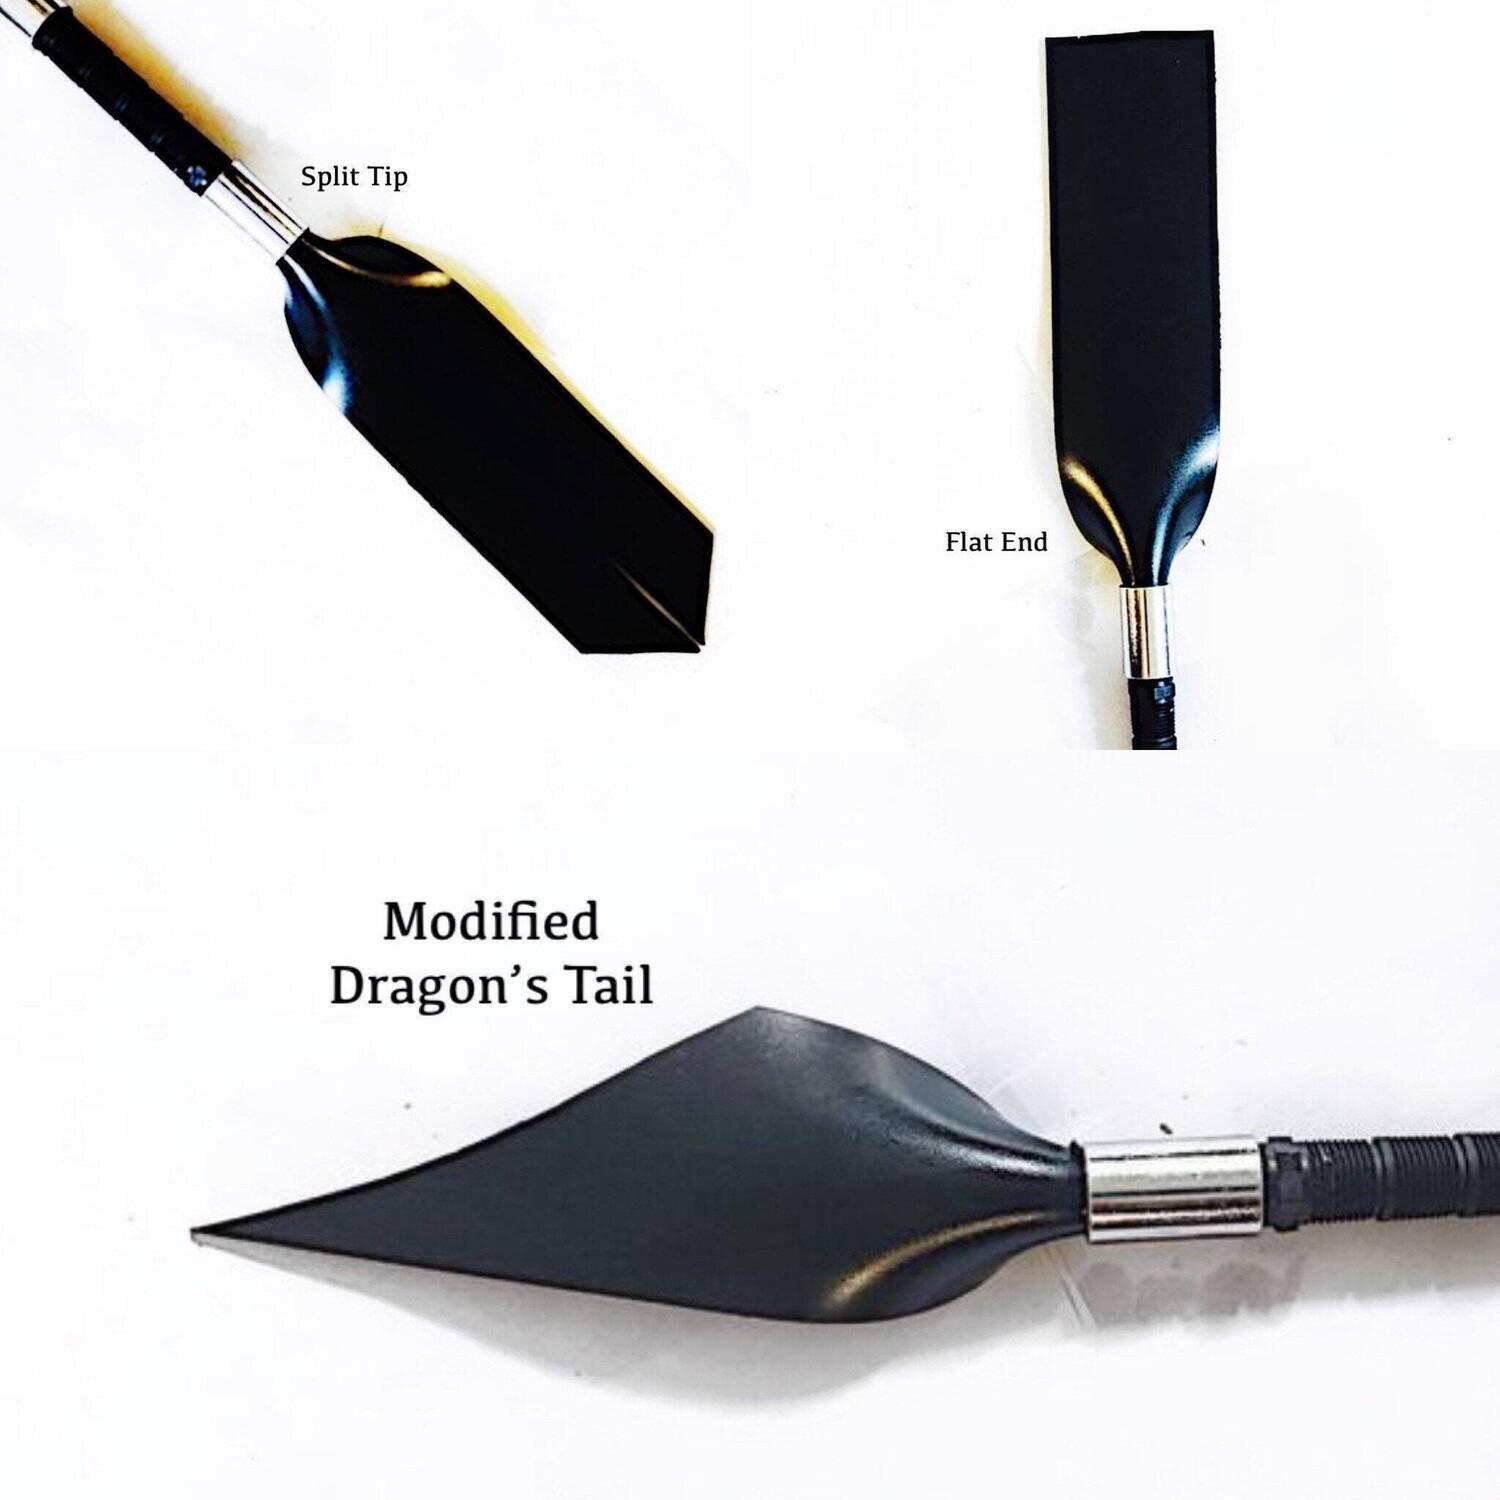 BDSM Spanking paddle rubber Strap Paddle with chrome metal accents- 3 paddle options - impact play  Gear Flogger